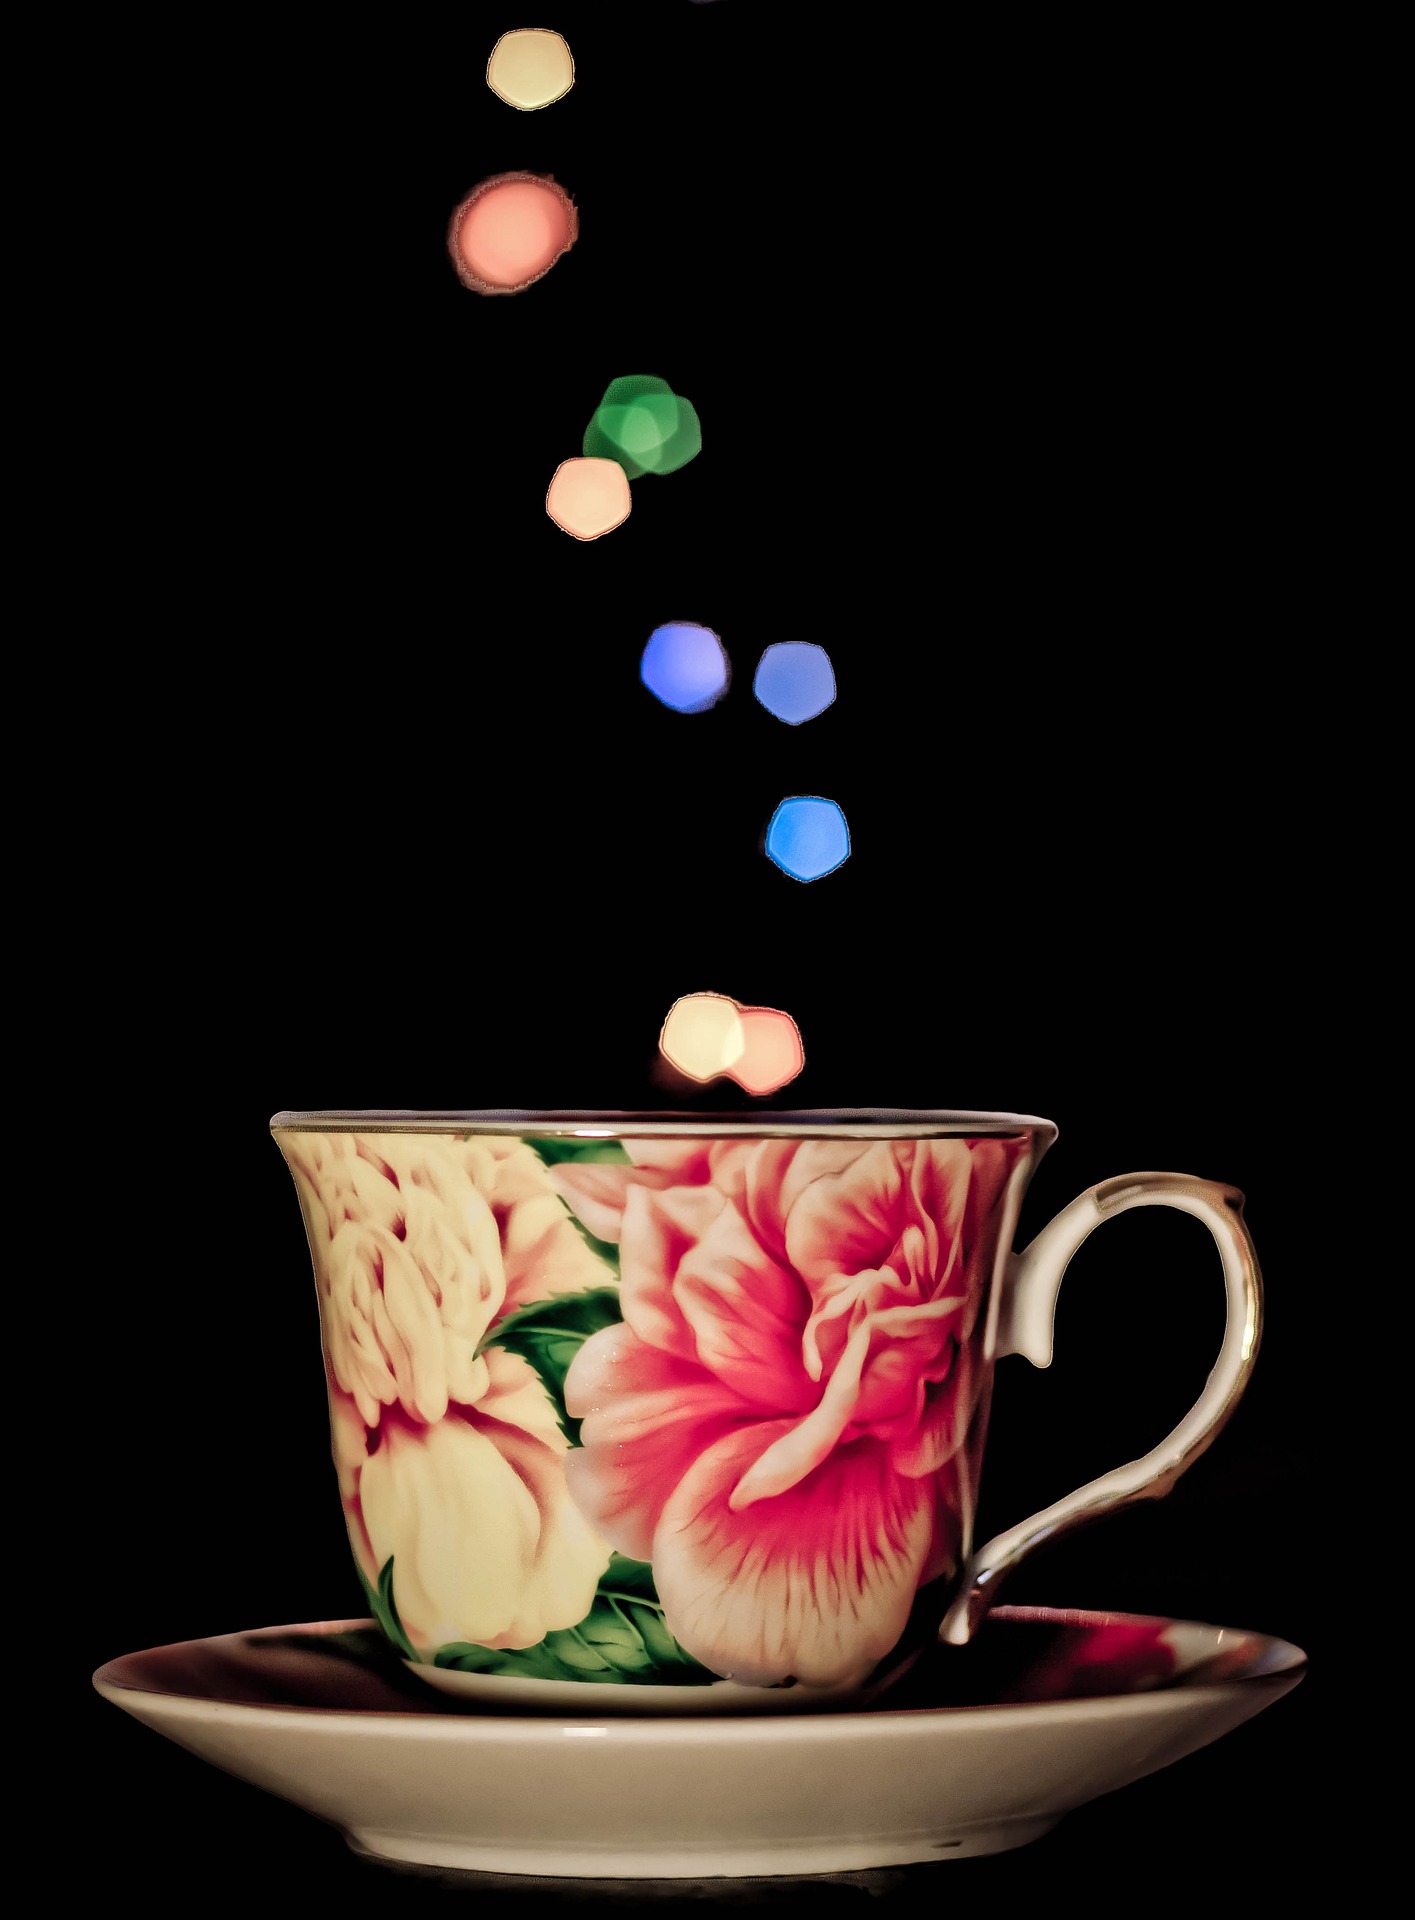 Cup and saucer with pink flower on cup. Small colorful shapes are emanating from the cup.